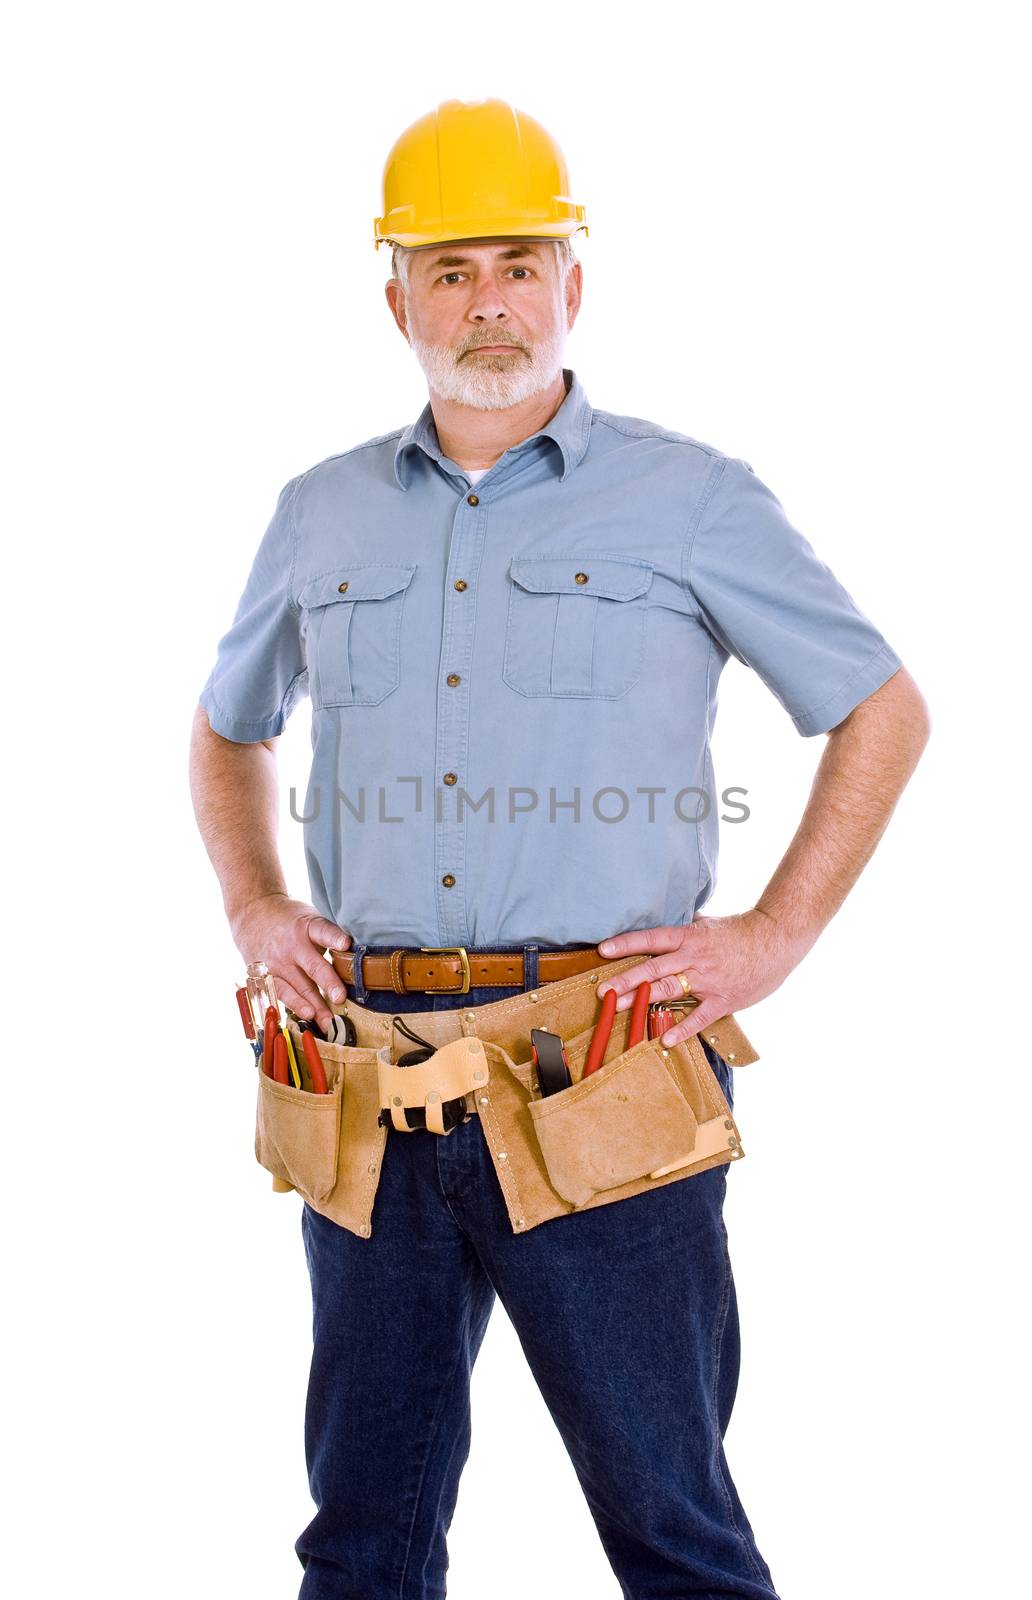 Portrait Of Manual Worker With Tool Belt by stockbuster1